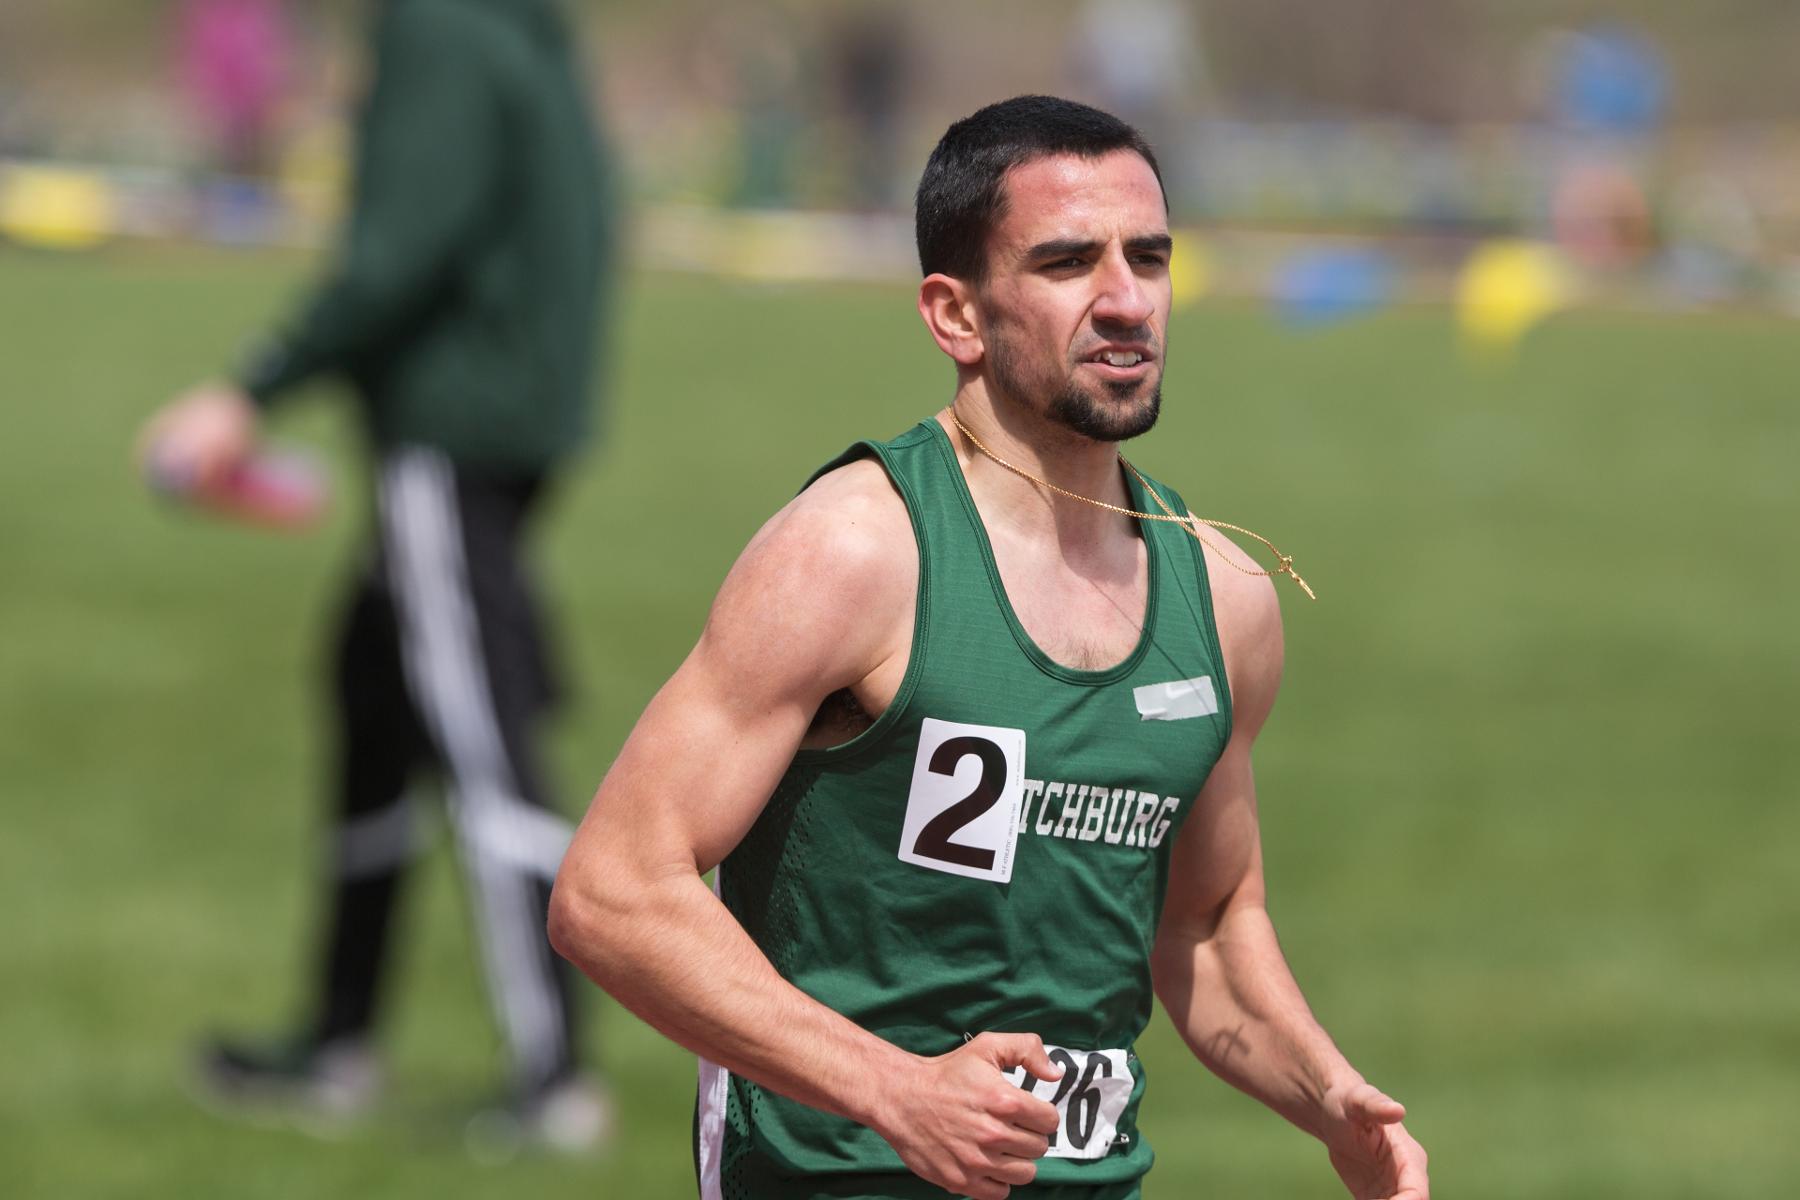 Amaral Earns MASCAC Track Athlete of the Week Honors